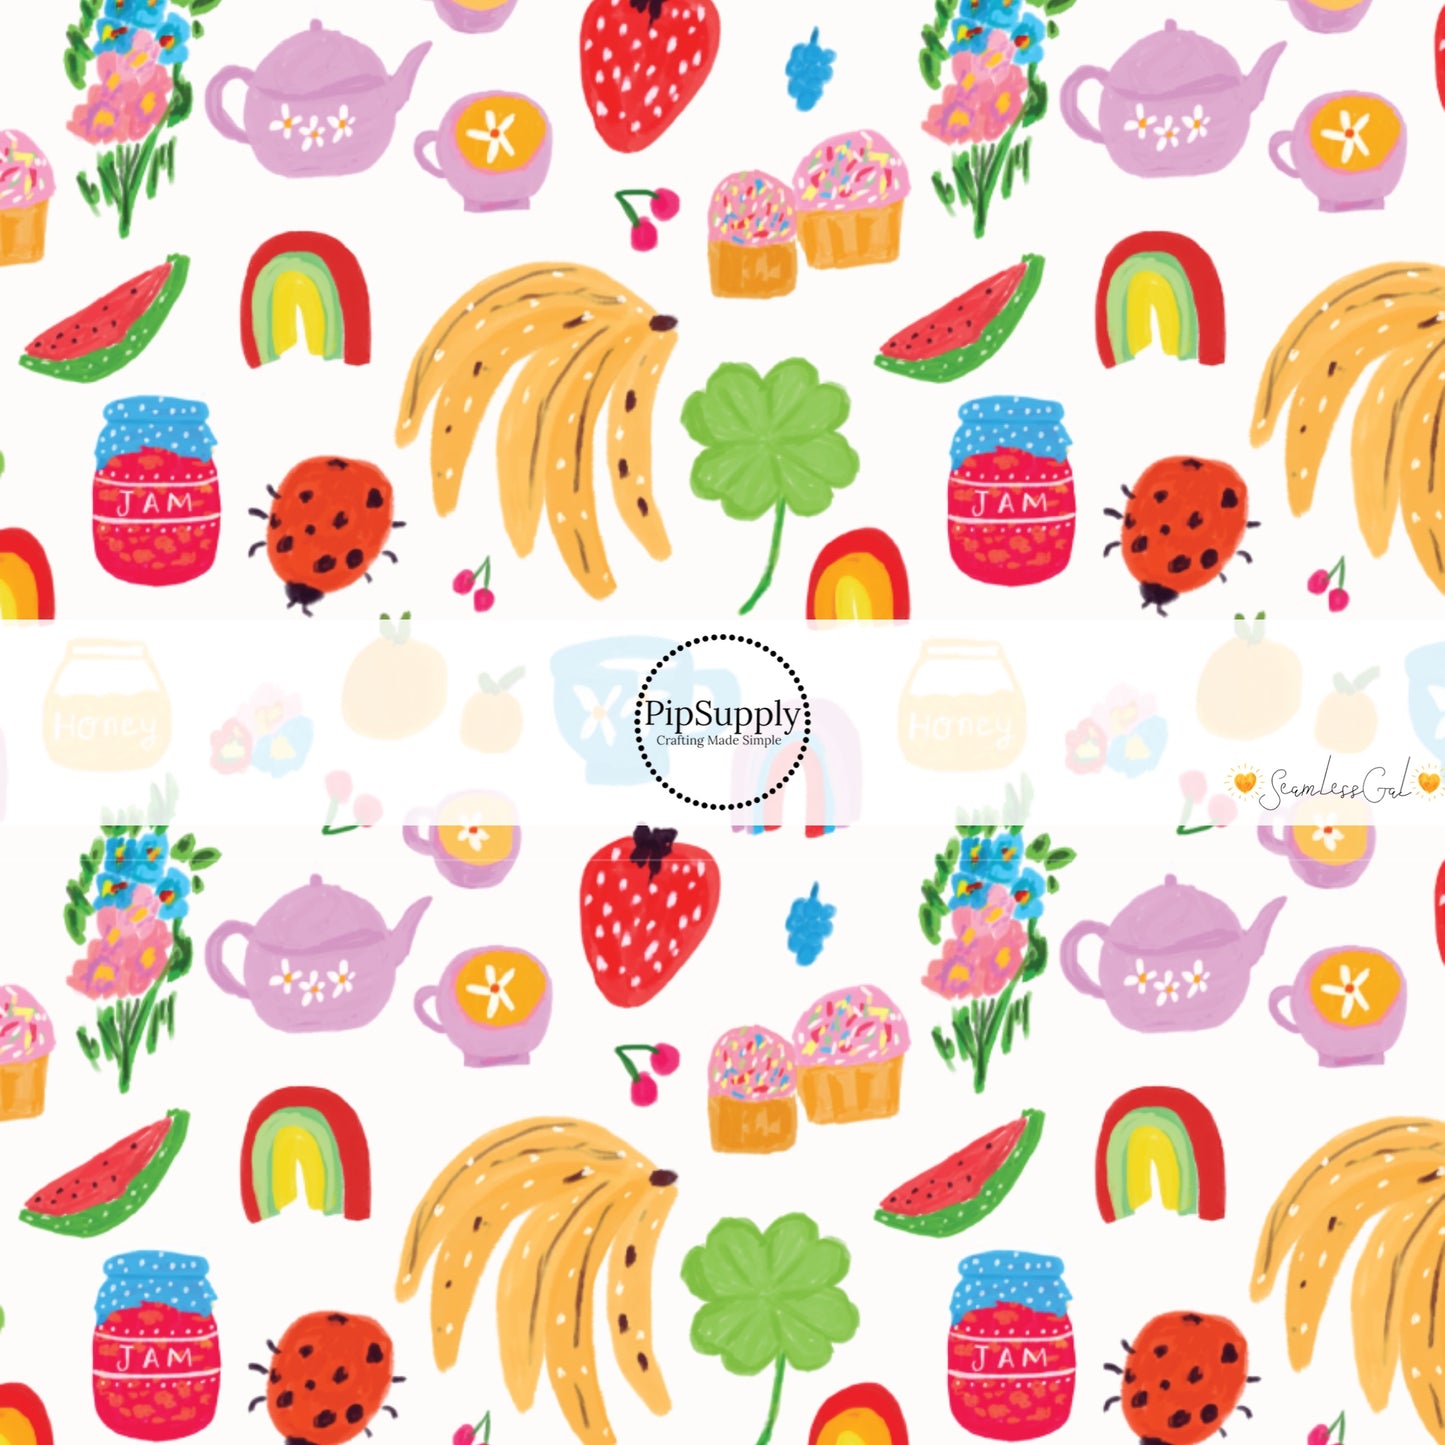 This summer fabric by the yard features fun picnic items on white. This fun themed fabric can be used for all your sewing and crafting needs!